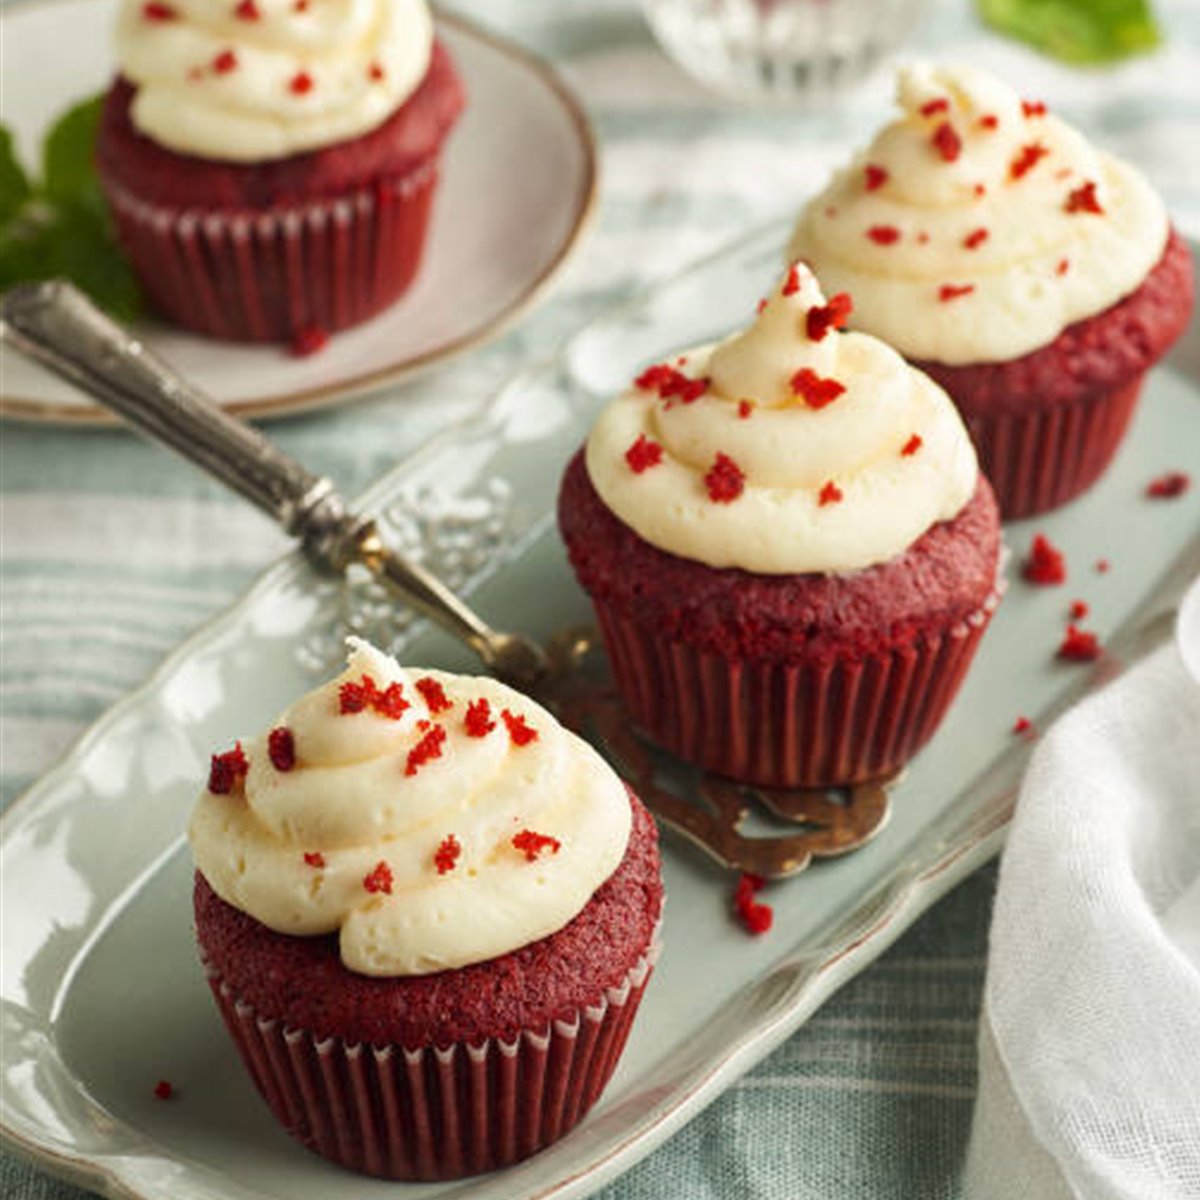 Cupcakes red velvet con frosting de queso